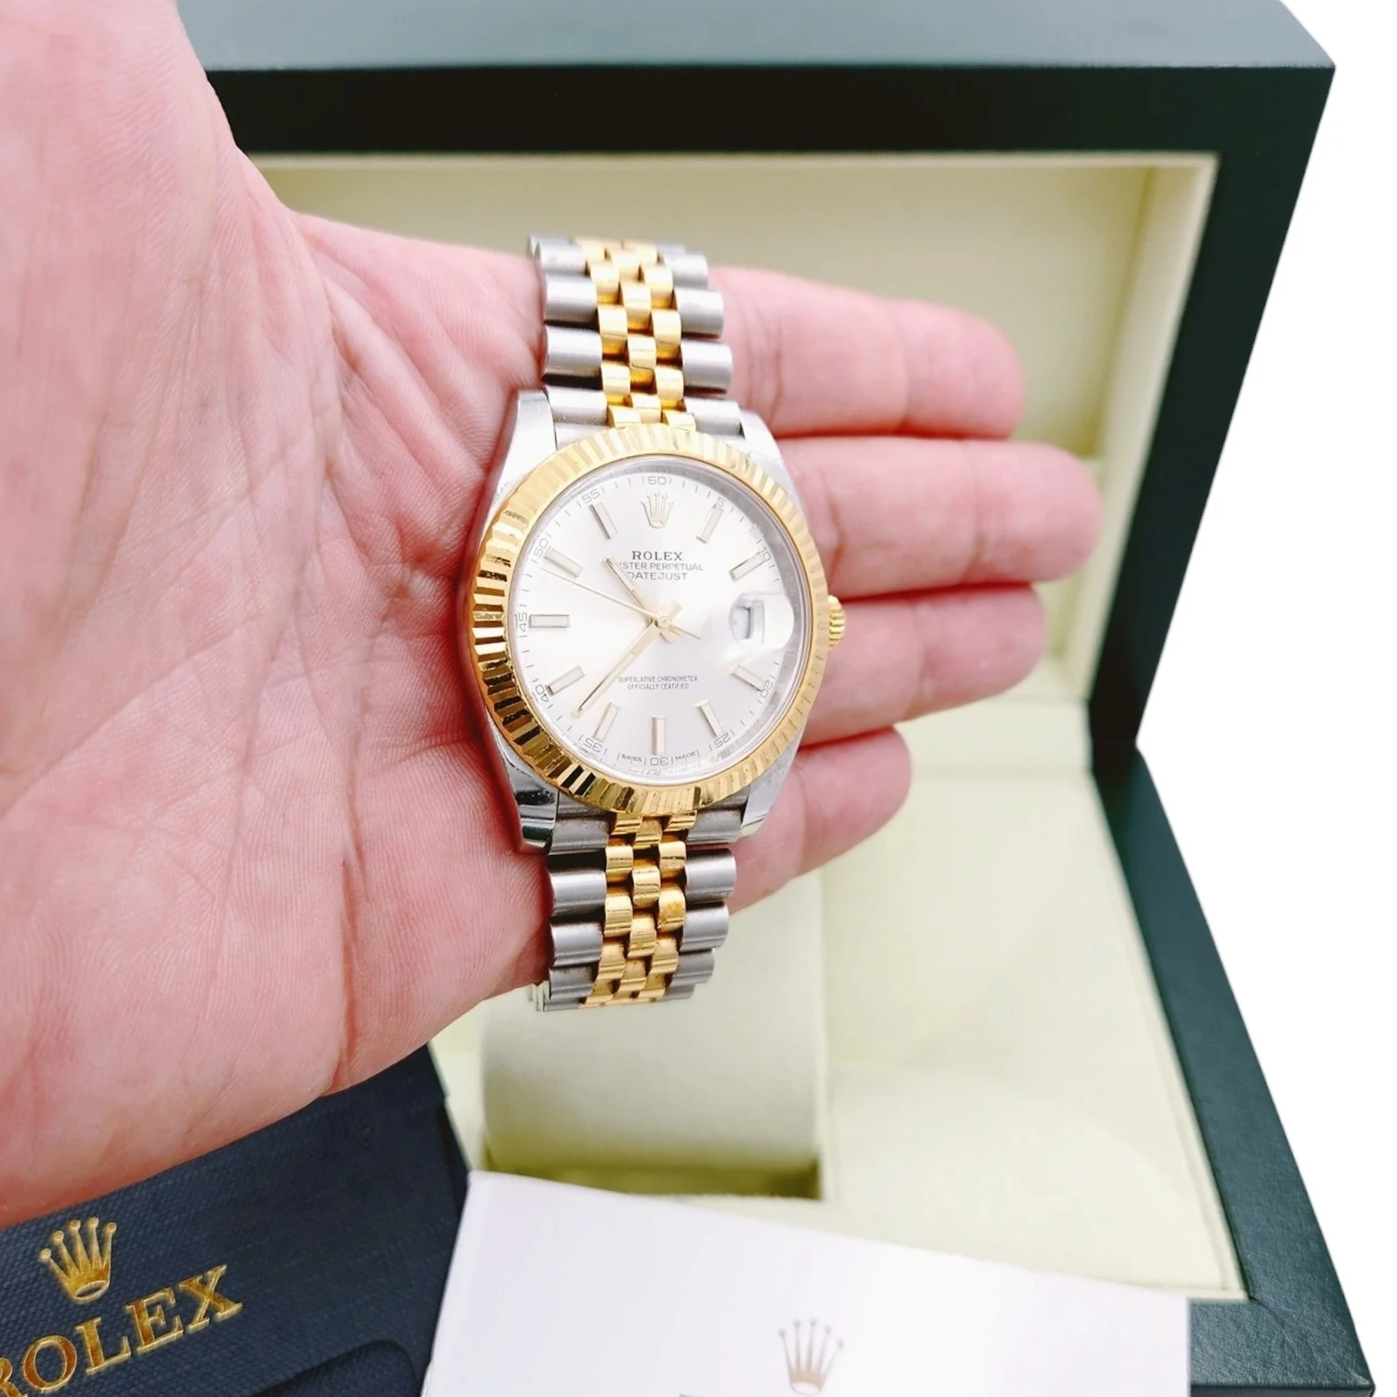 2017 Men's Rolex 41mm DateJust Two Tone 18K Yellow Gold / Stainless Steel Wristwatch w/ Silver Dial & Fluted Bezel. (Pre-Owned 126333)